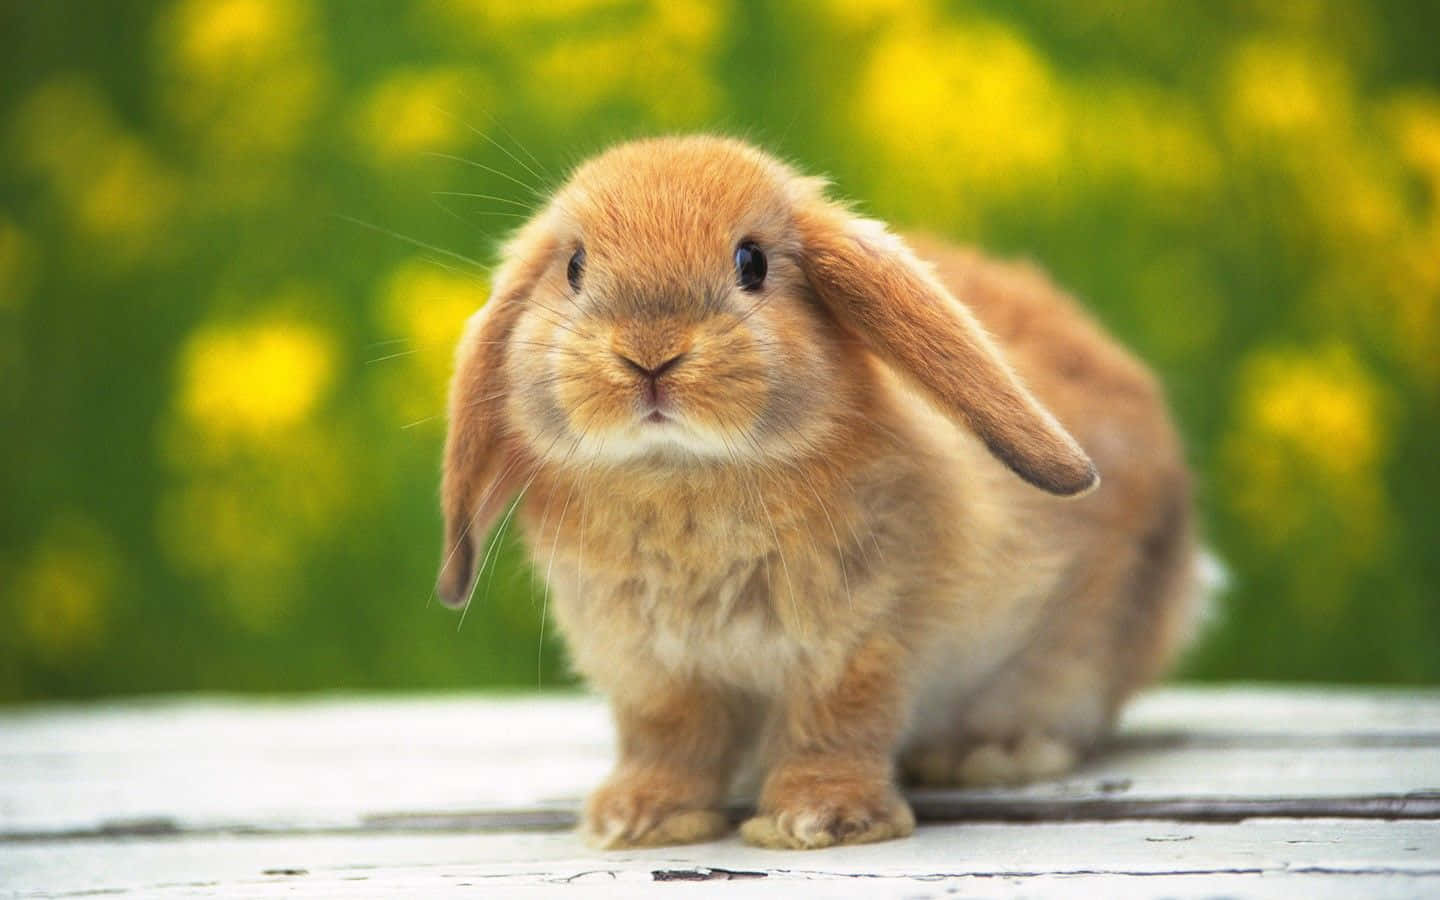 Soft and fluffy Bunny looks up with gentle eyes